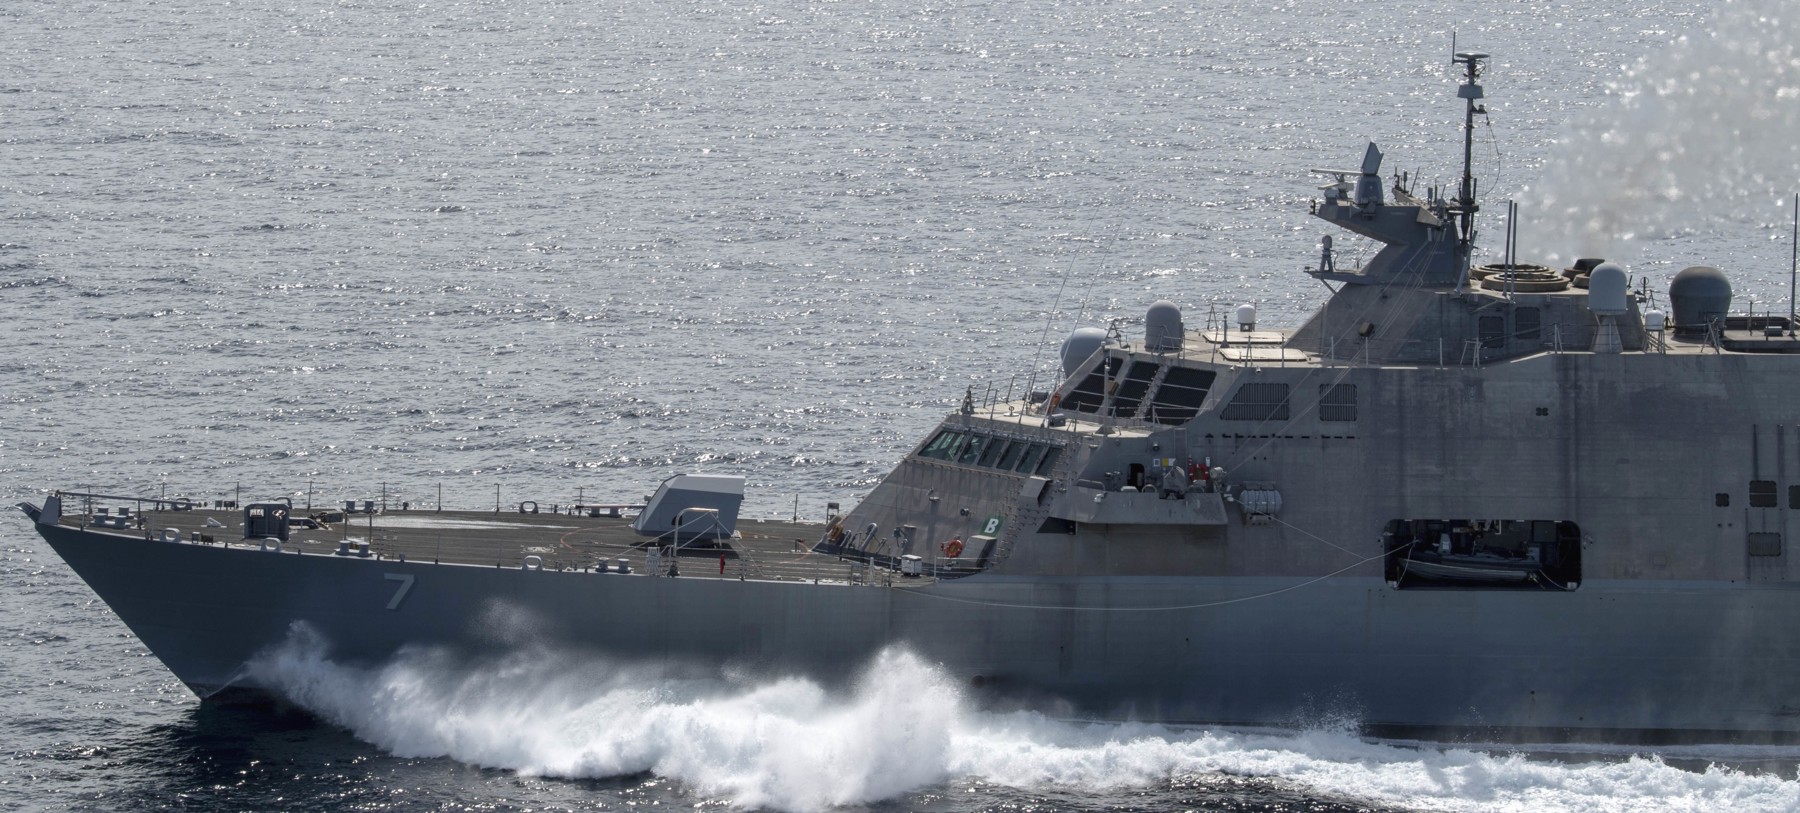 lcs-7 uss detroit freedom class littoral combat ship us navy 32